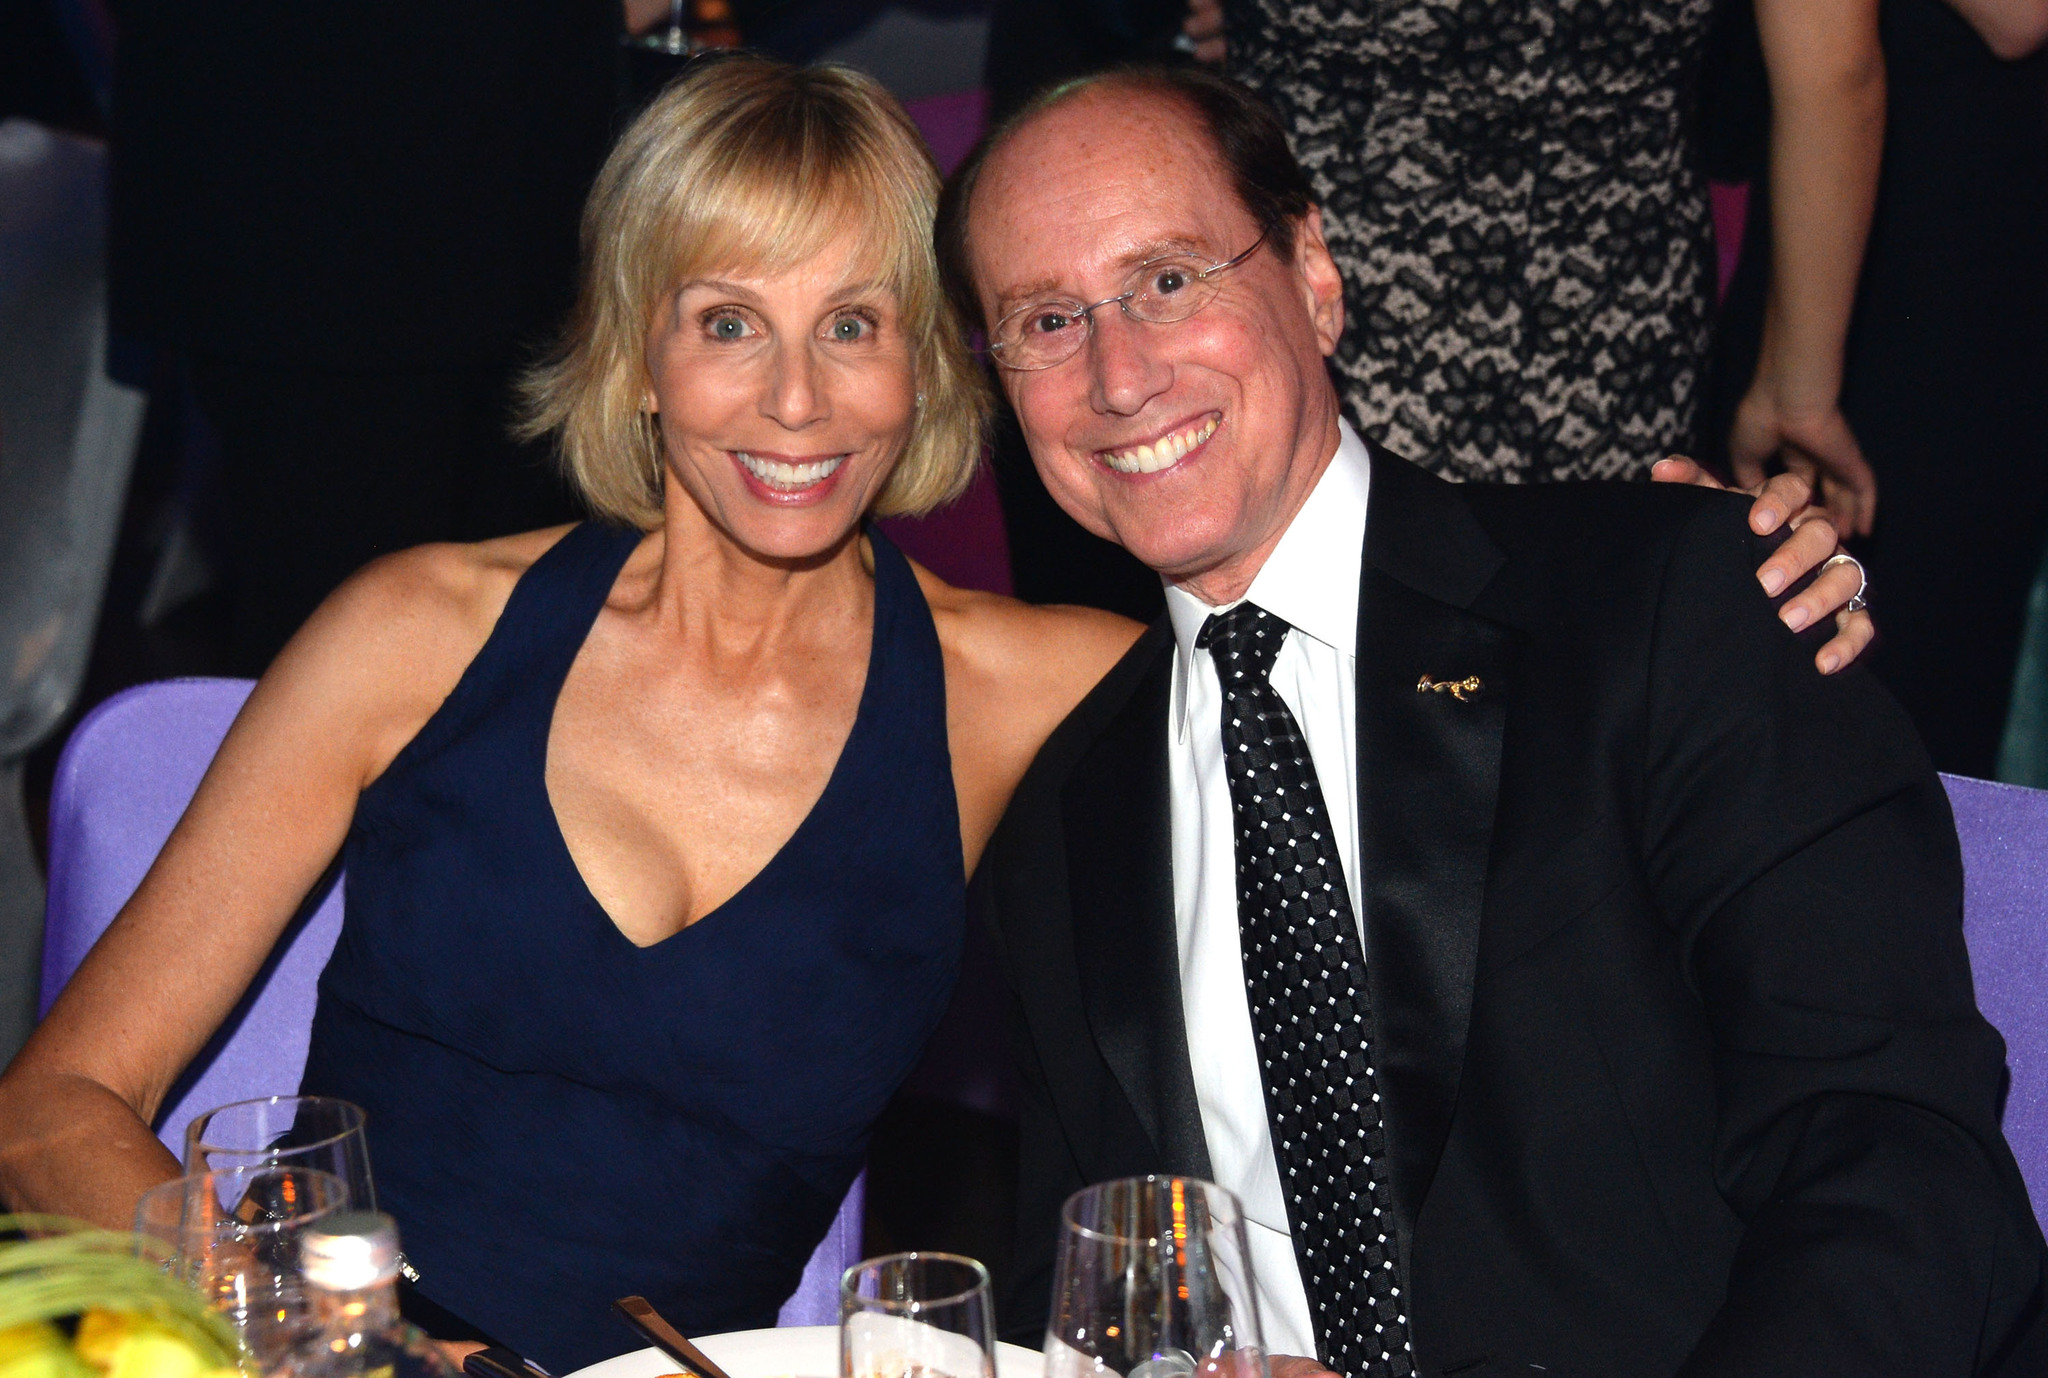 Academy of Television Arts & Sciences Outgoing President & CEO Alan Perris (R) and wife Donna pose at the 2013 Creative Arts Emmy Awards Governors Ball held at the Los Angeles Convention Center on September 15, 2013 in Los Angeles, California.